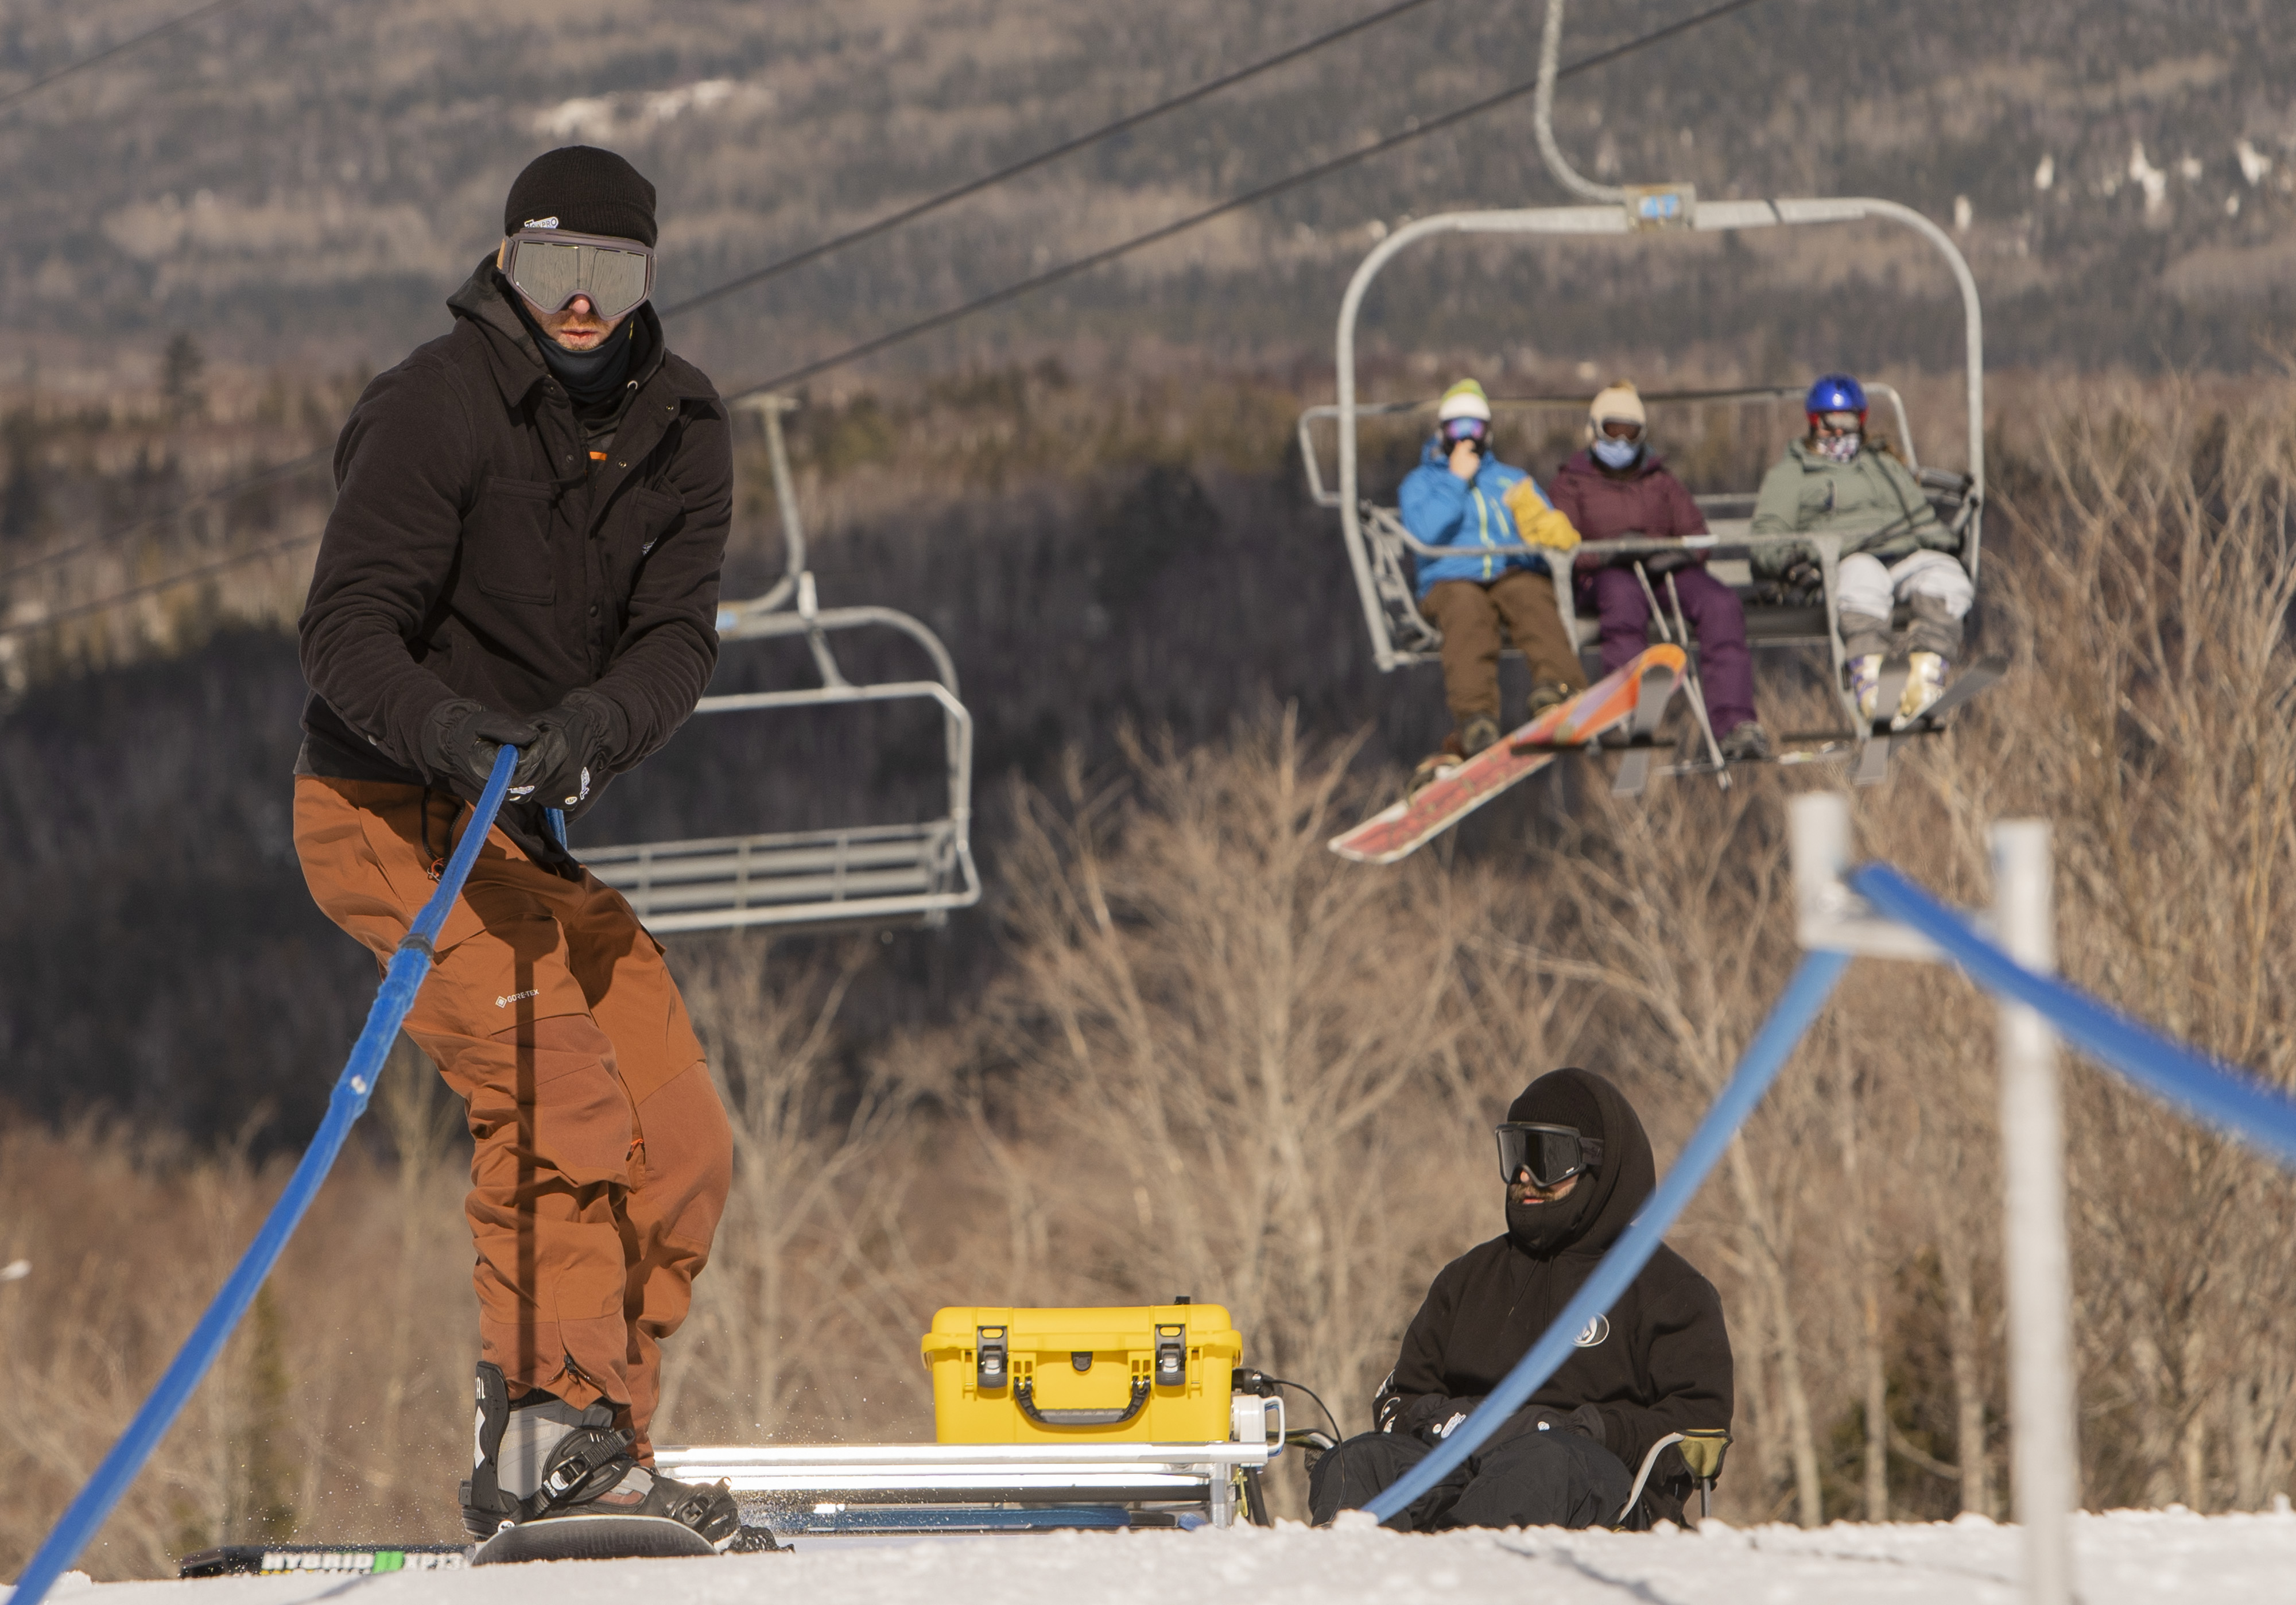 Nh Ski Lift Entrepreneurs Innovate With Products For Backyards And Resorts The Boston Globe